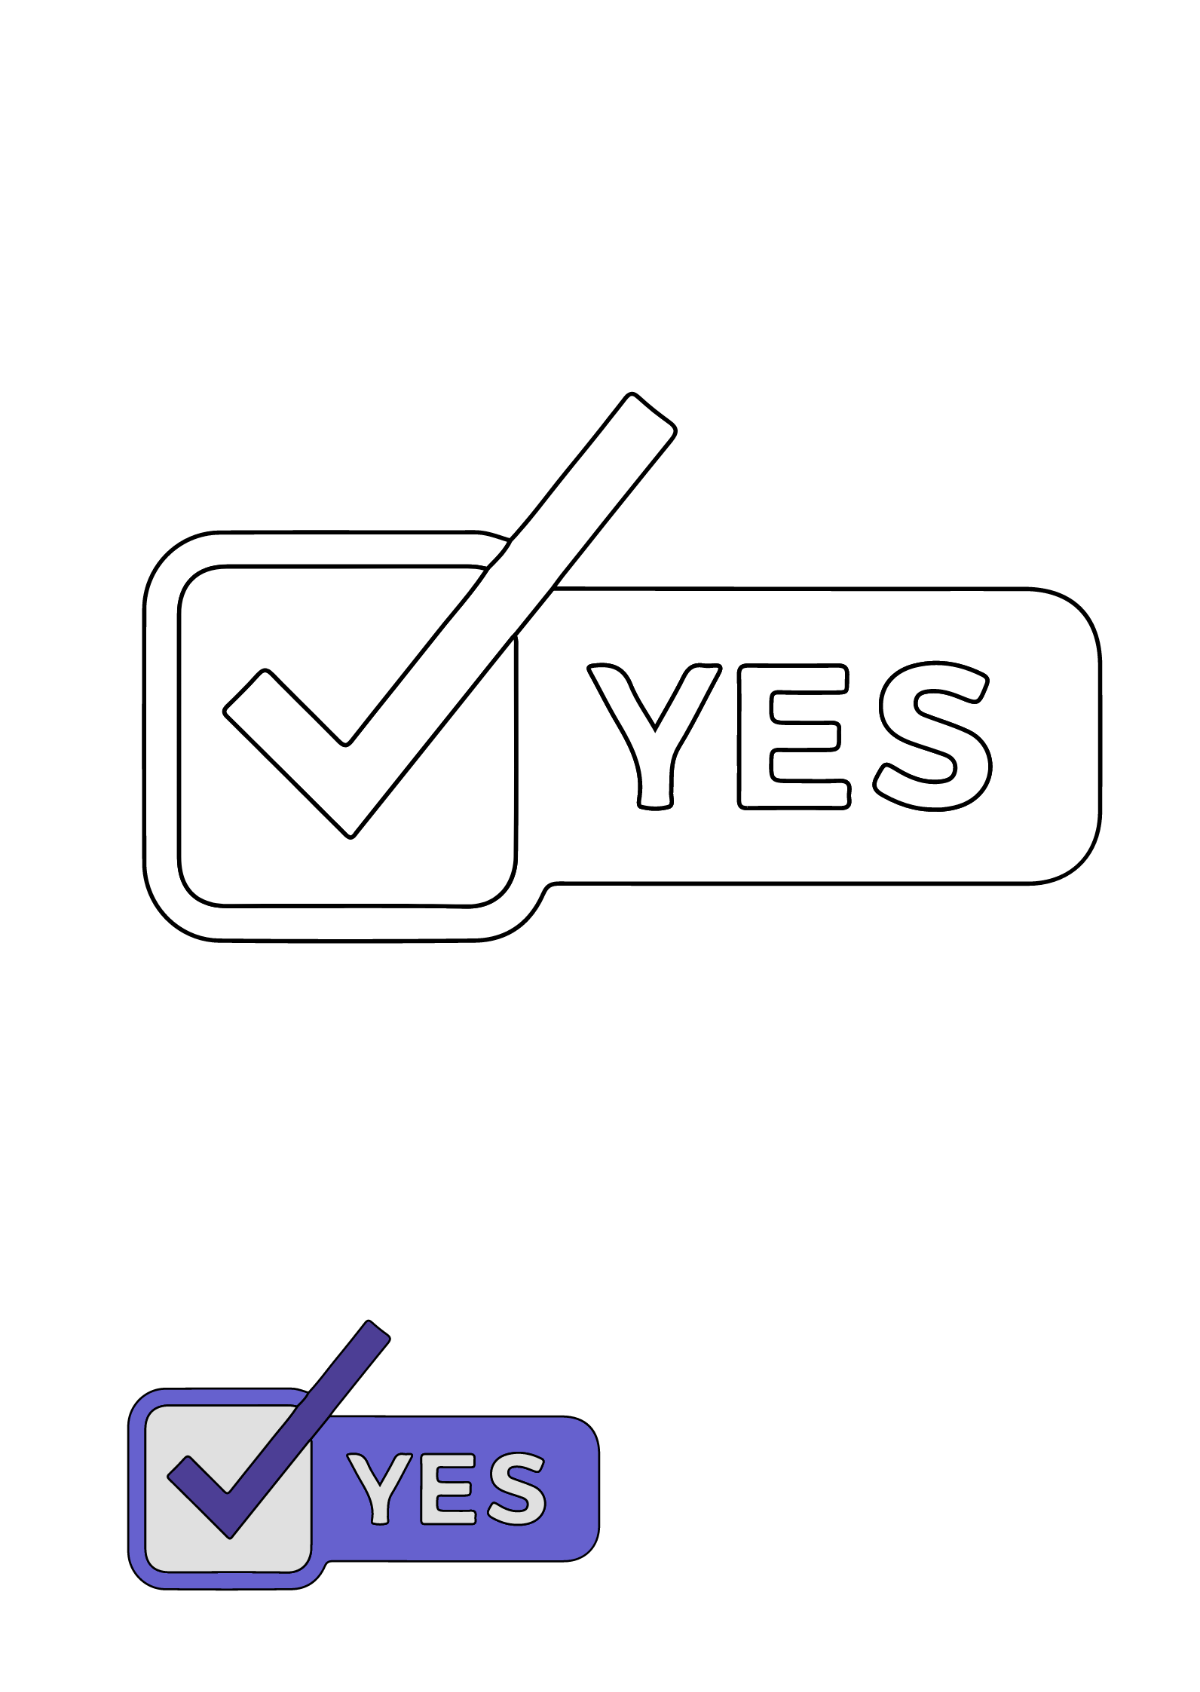 Free Yes Tick Mark coloring page Template